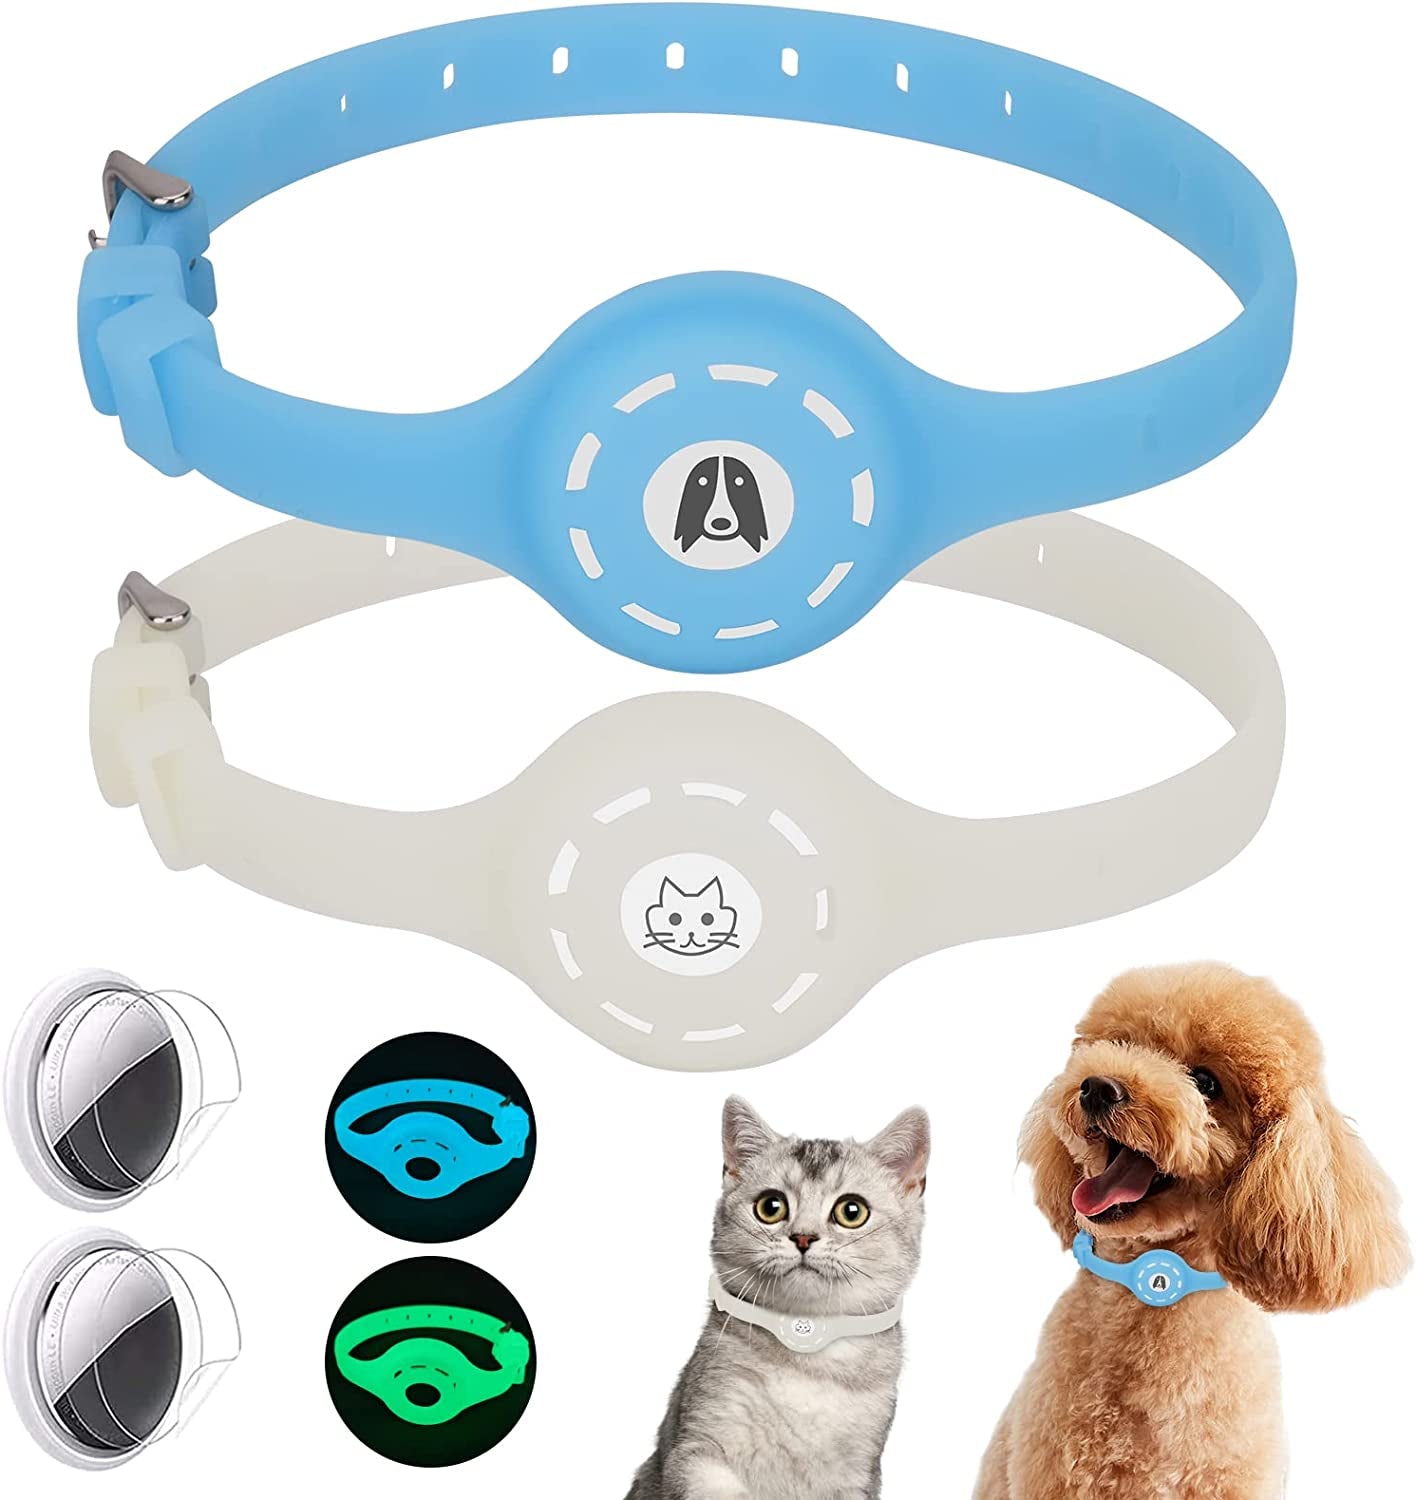 Airtag Cat Collar with Airtag Holder Case Integrated 2 Pack, Luminous Silicone Anti-Lost Apple Air Tag Dog Holder for Pet and 2 HD Protective Film Set